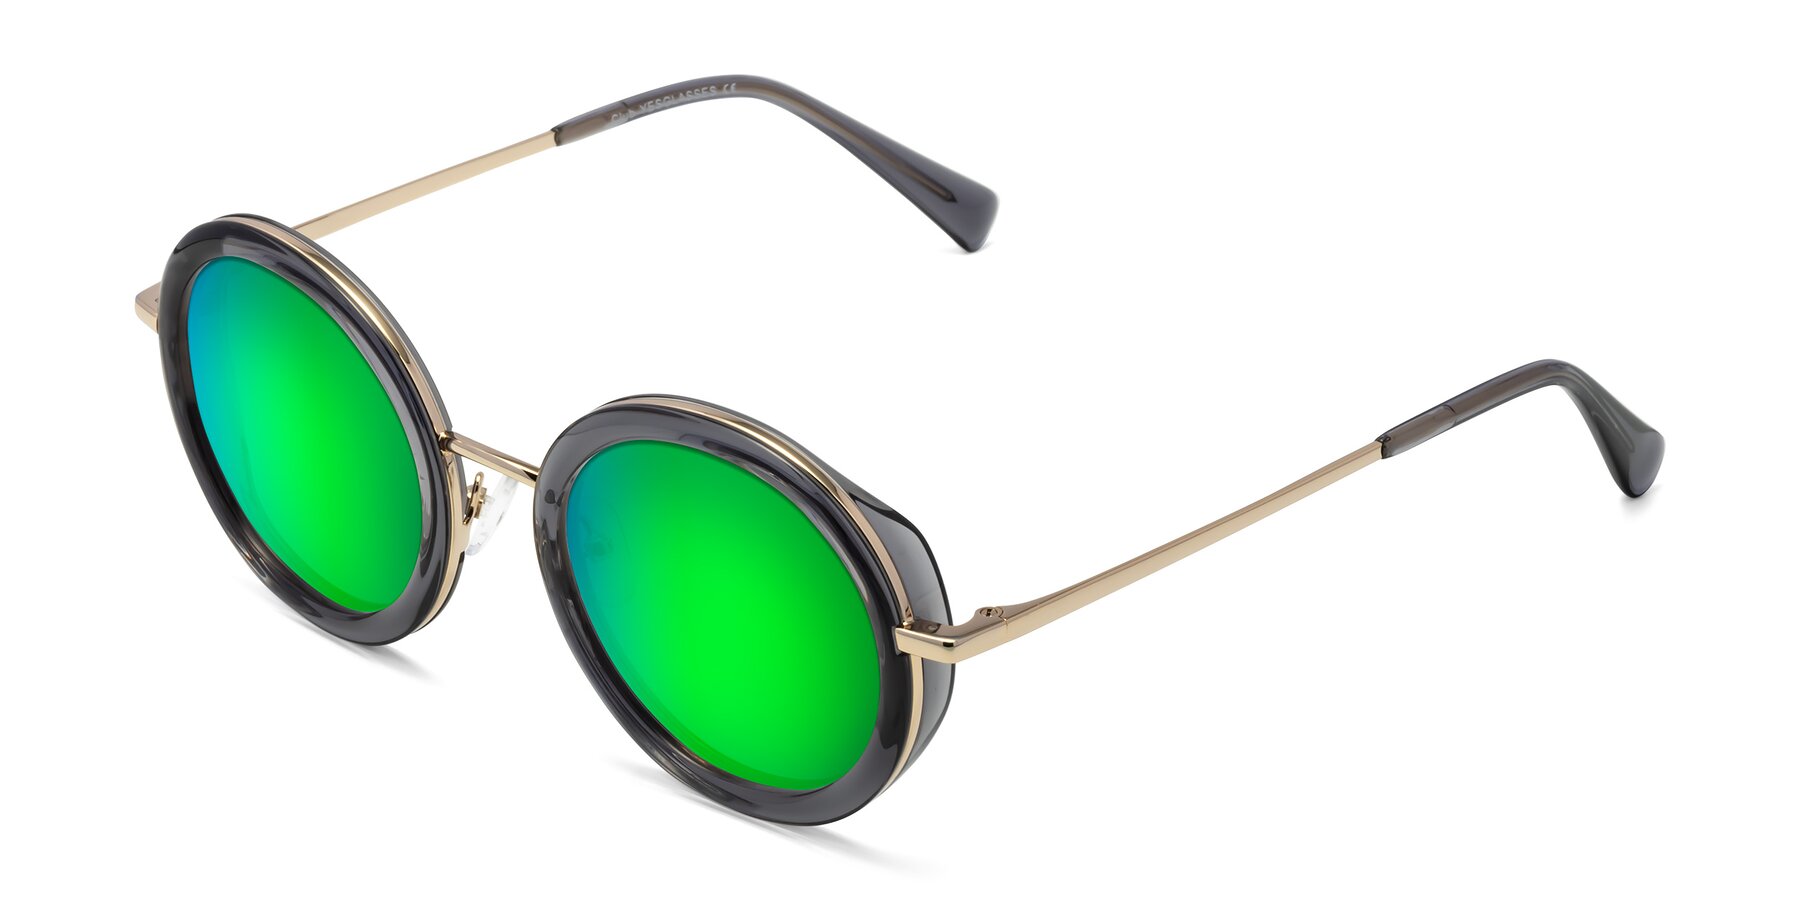 Angle of Club in Gray-Gold with Green Mirrored Lenses